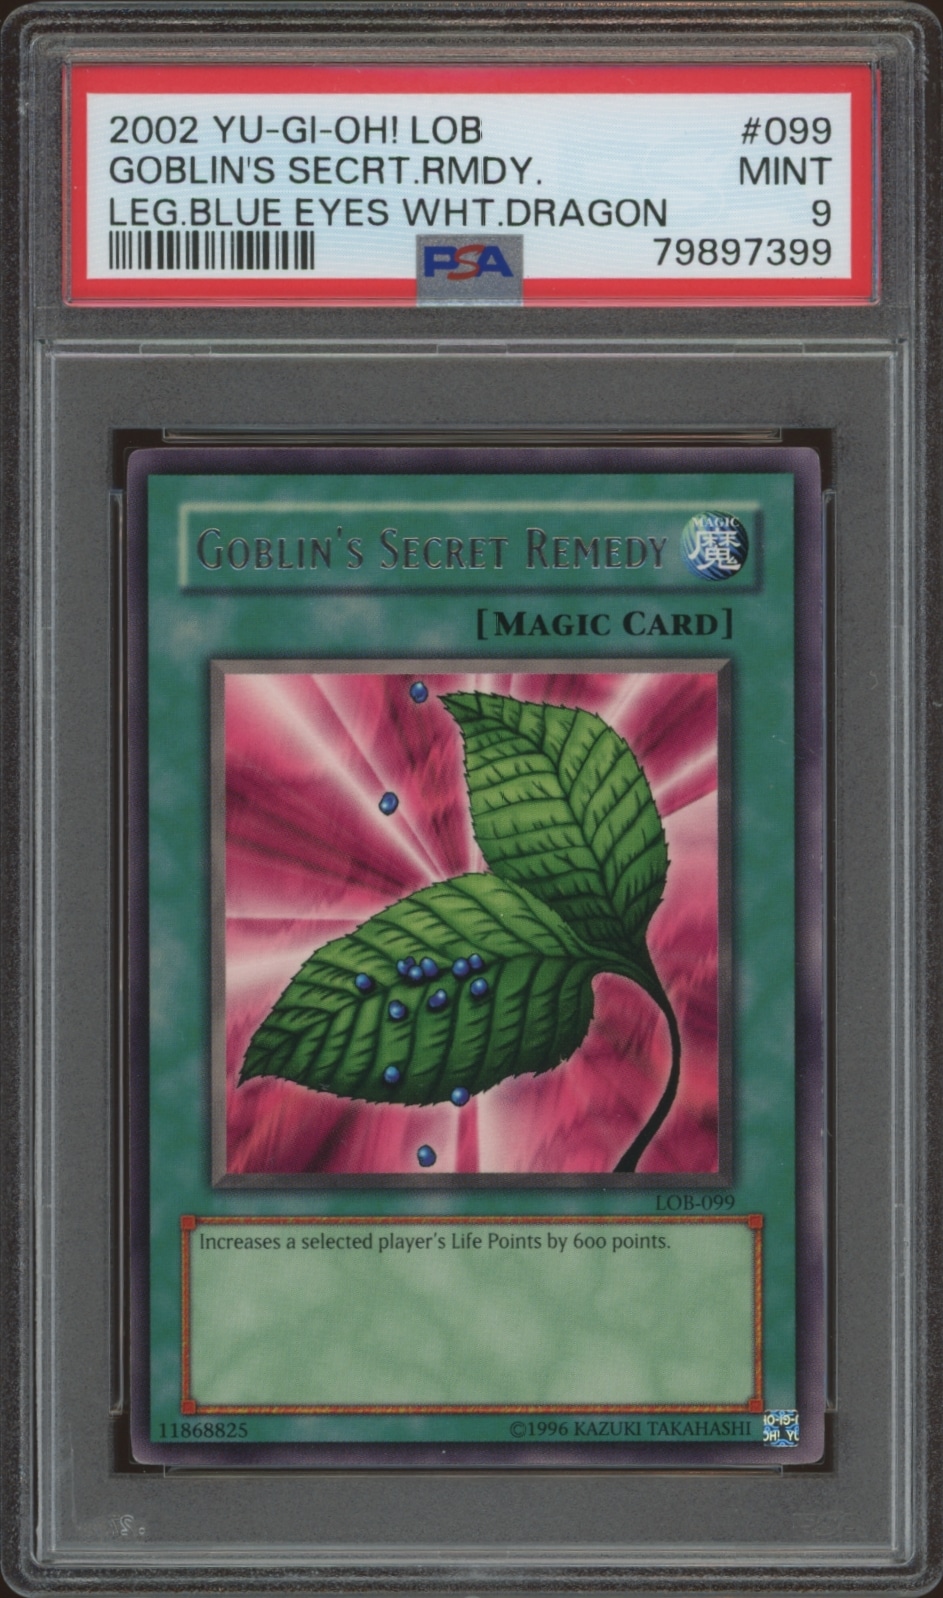 PSA-graded Yu-Gi-Oh! 2002 Goblins Secret Remedy card in mint condition.